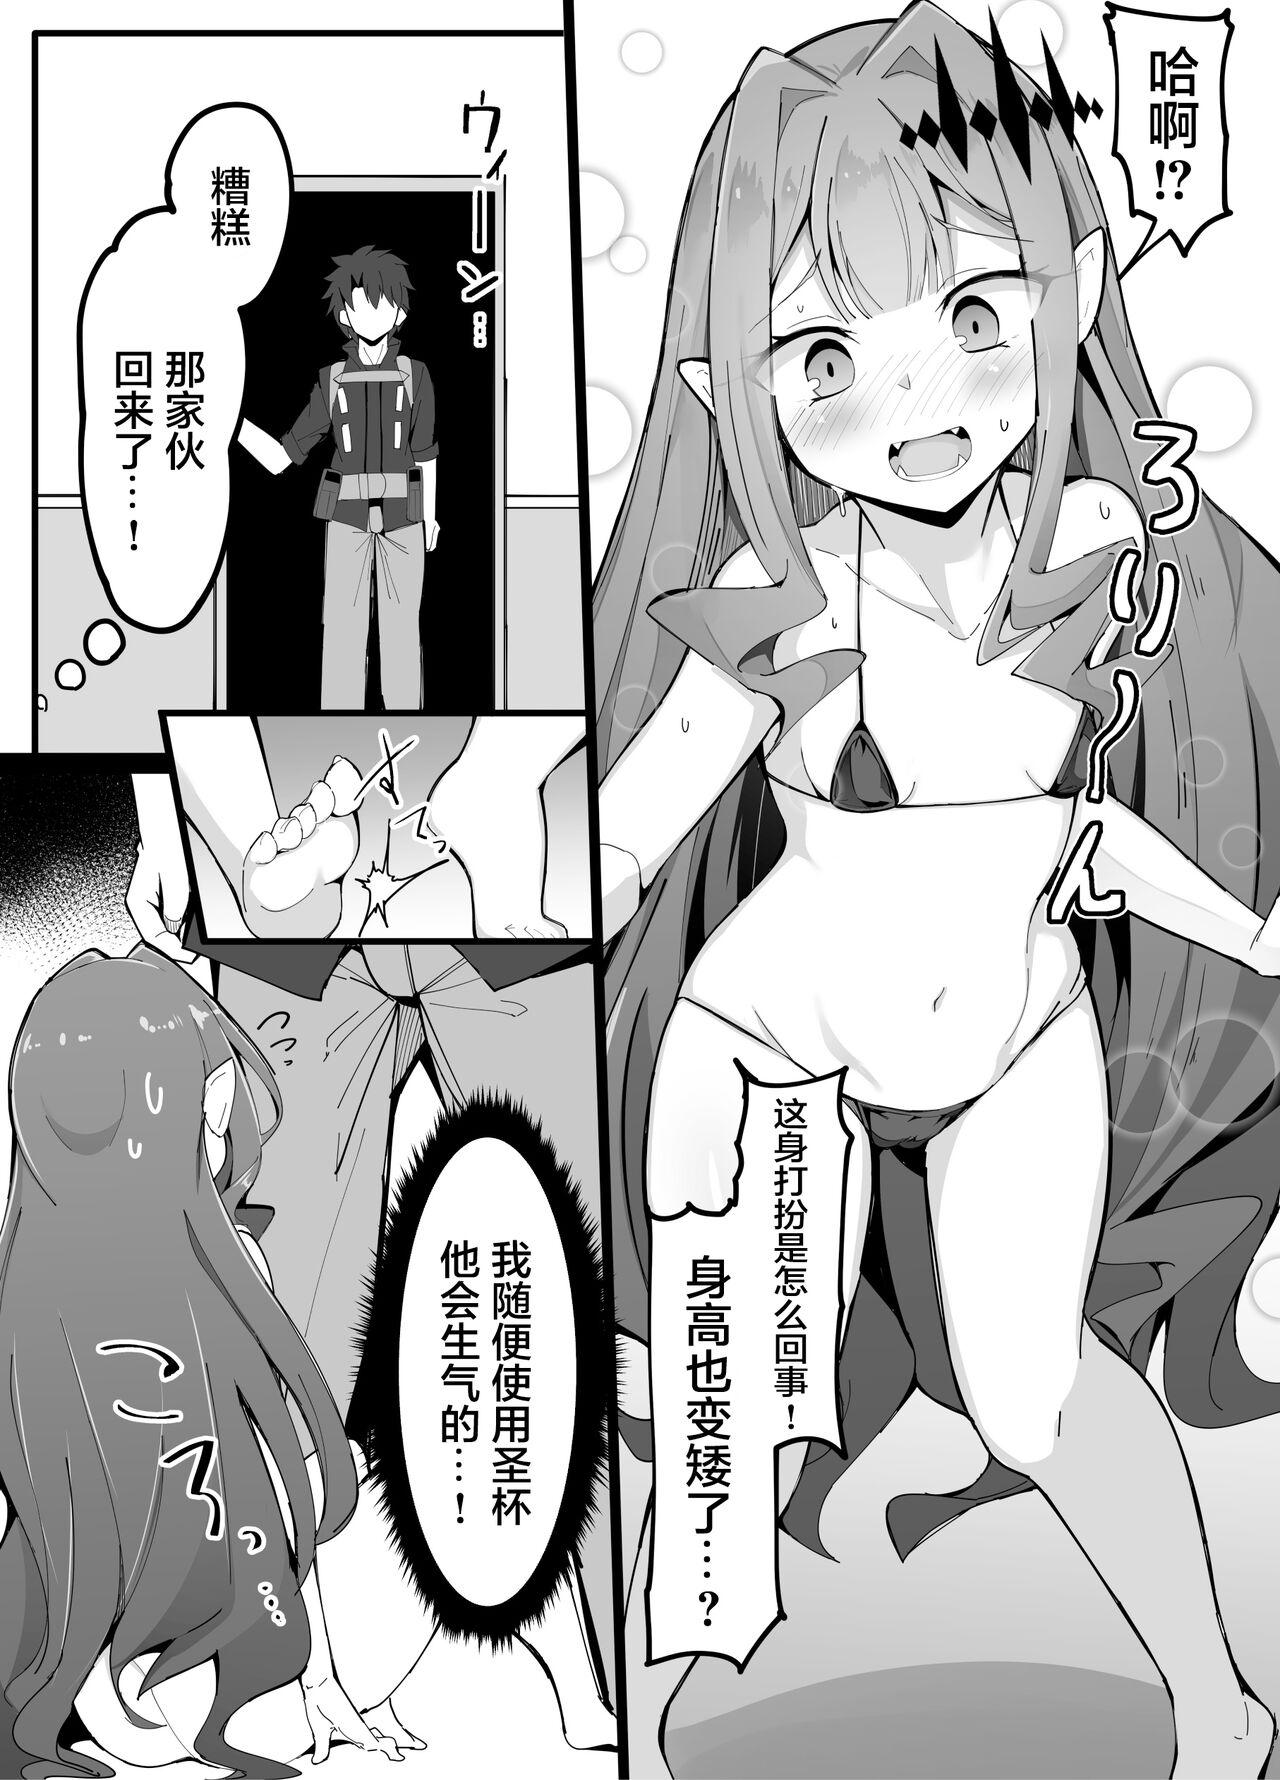 Old Man 幼精騎士ロリスタン - Fate grand order Mmf - Page 4